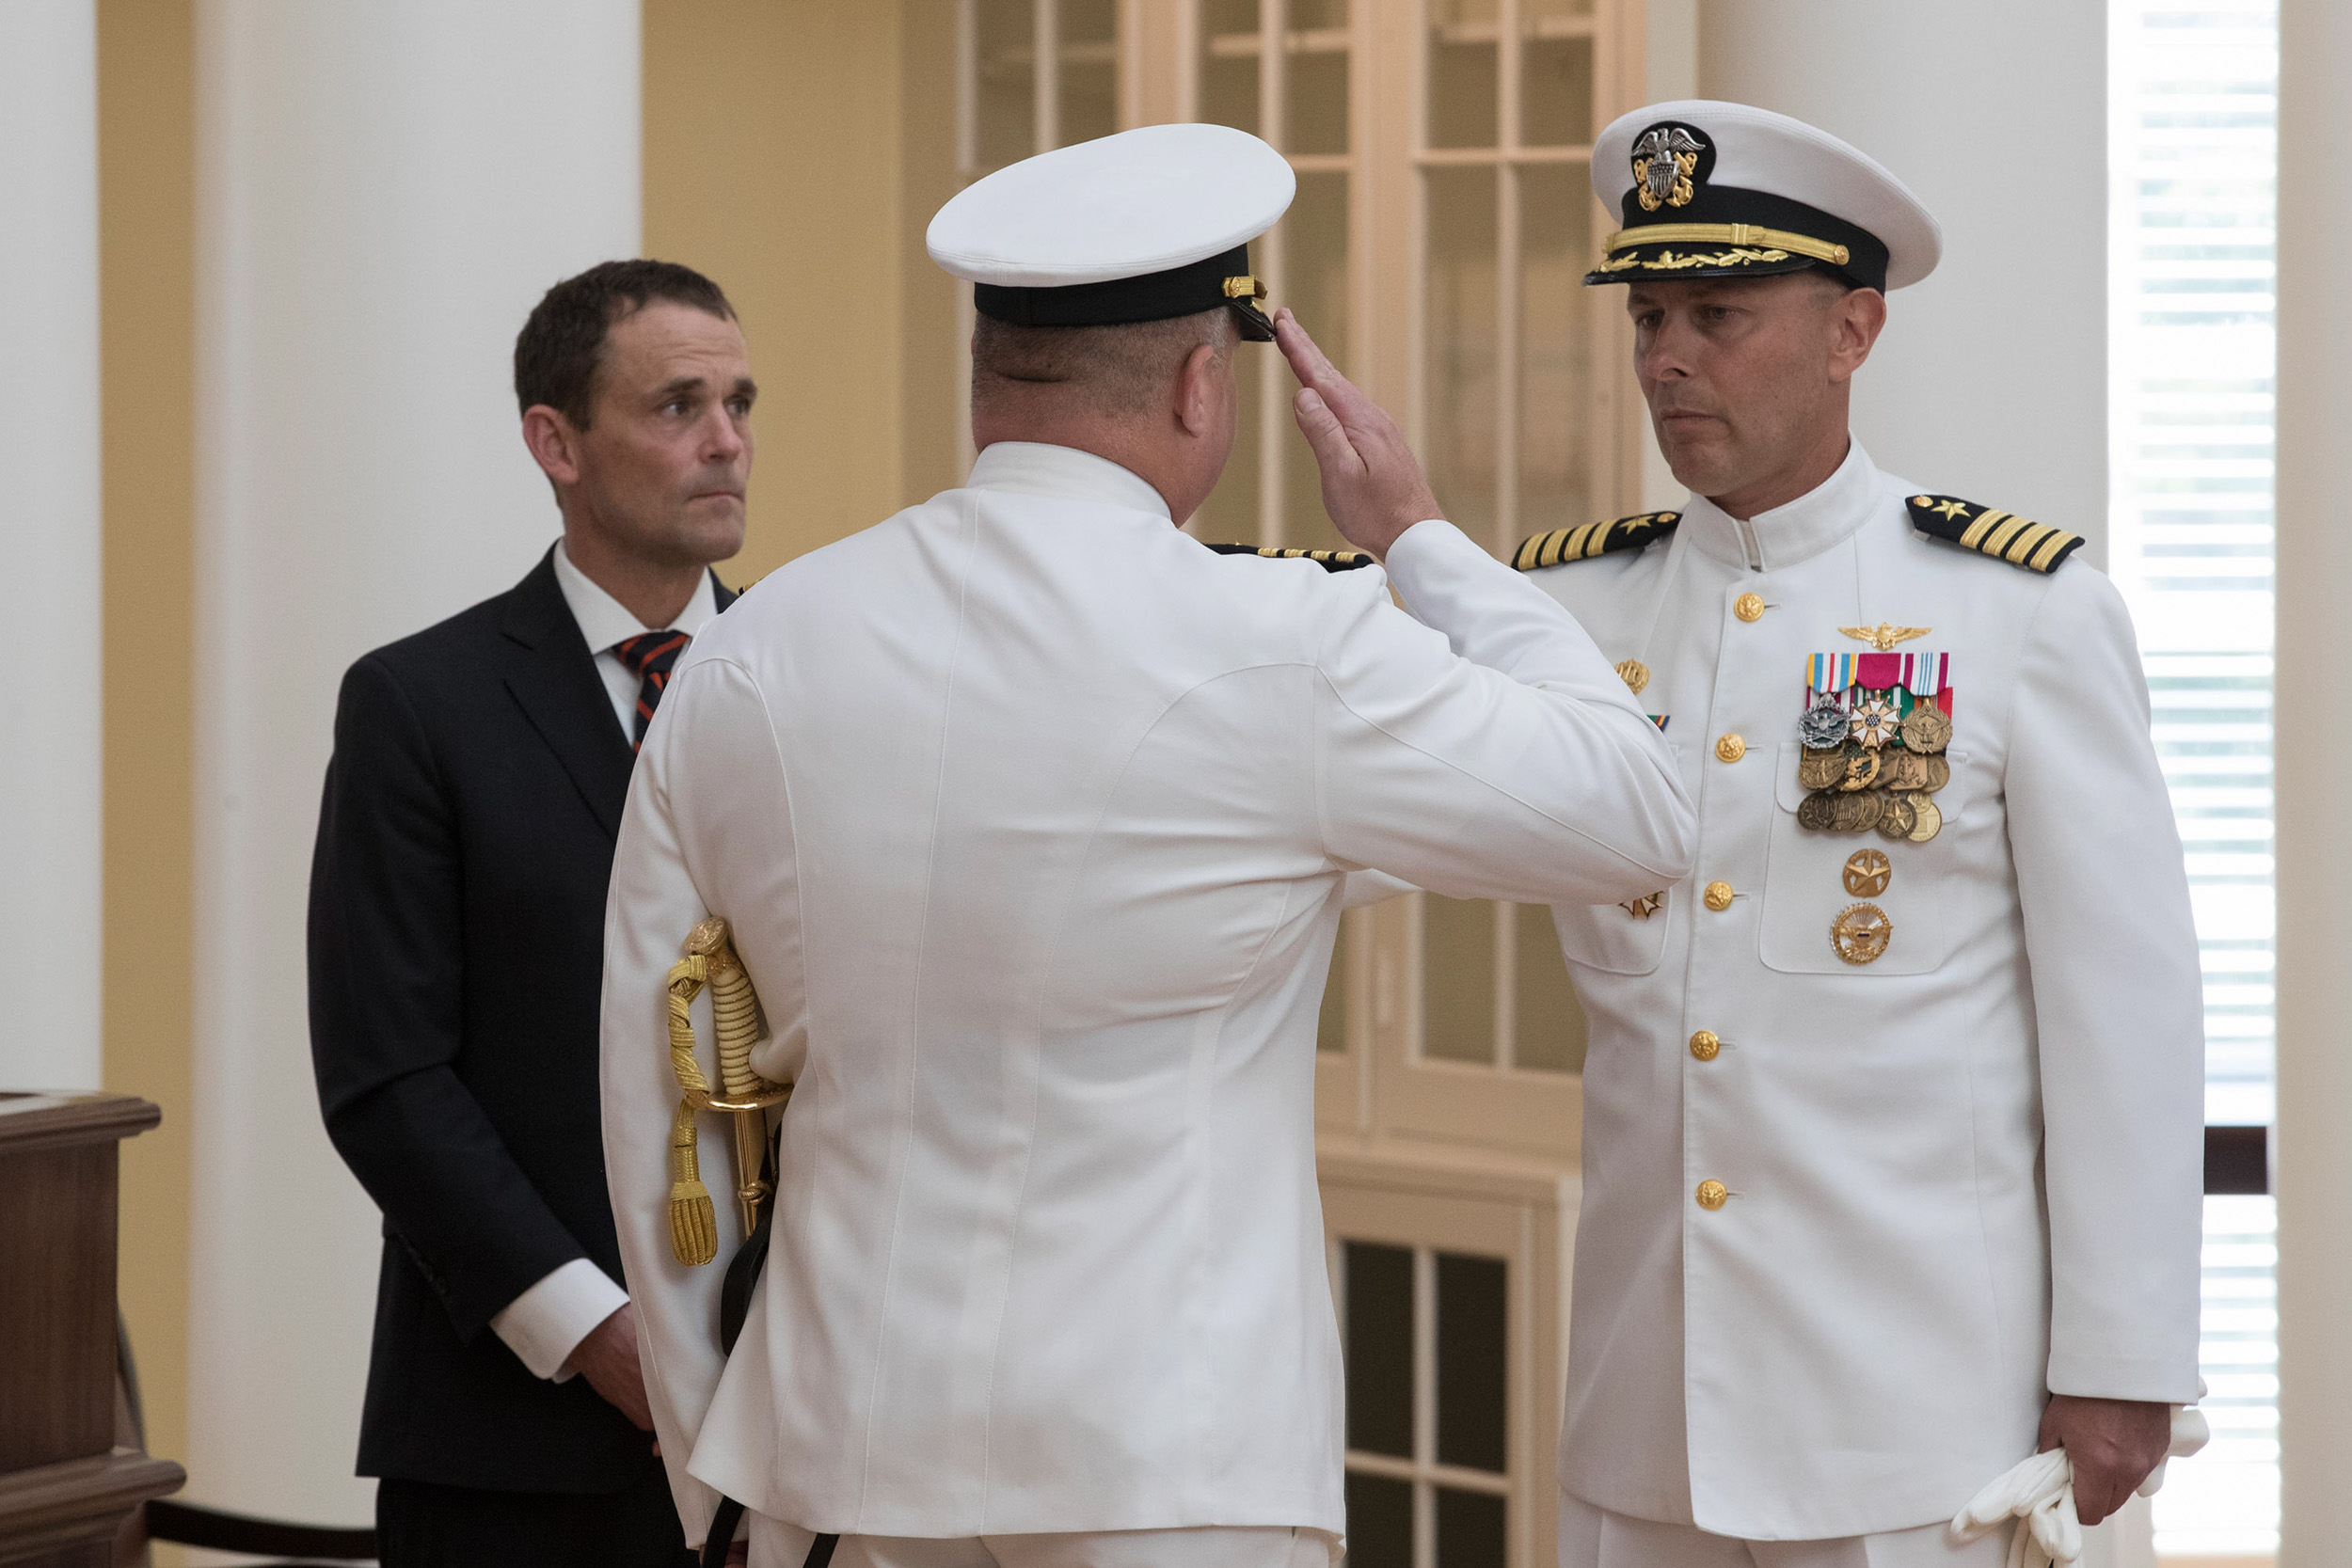 UVA President Jim Ryan, left, presides over the retirement ceremony in which U.S. Navy Capt. Christopher Misner, right, turned command over to Capt. Kevin Kennedy.